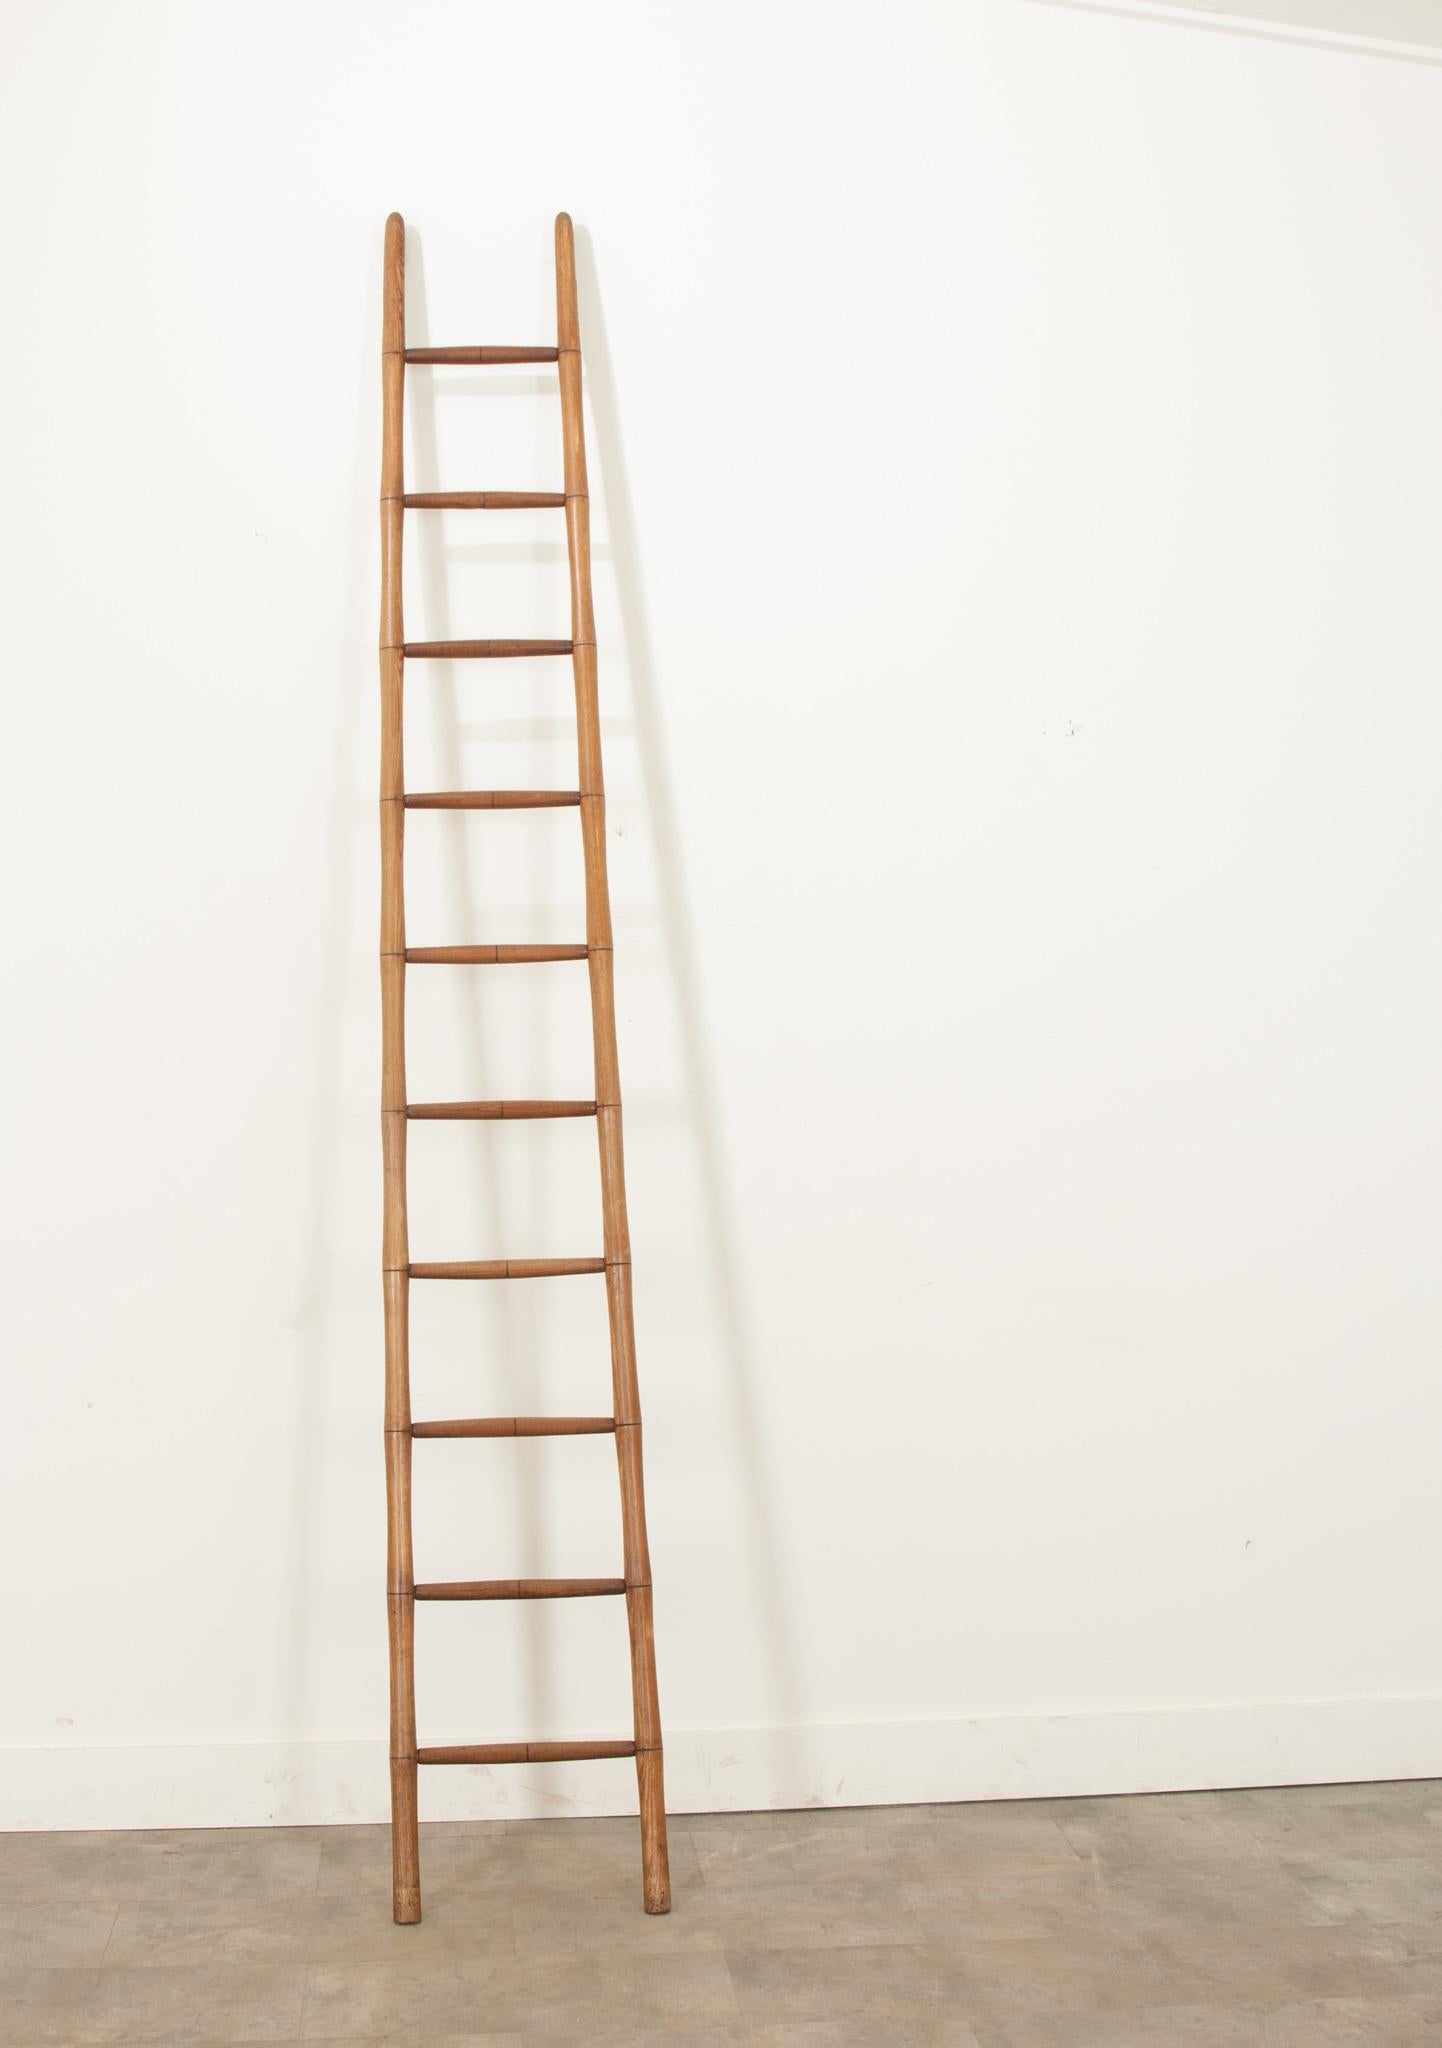 This wonderful pine, faux bamboo kitchen ladder is a gorgeous accessory in any space. The vibrant hardwood has a fantastic patina from decades of use. Crafted in England during the 19th century, it's still functional as a ladder or an elegant way to